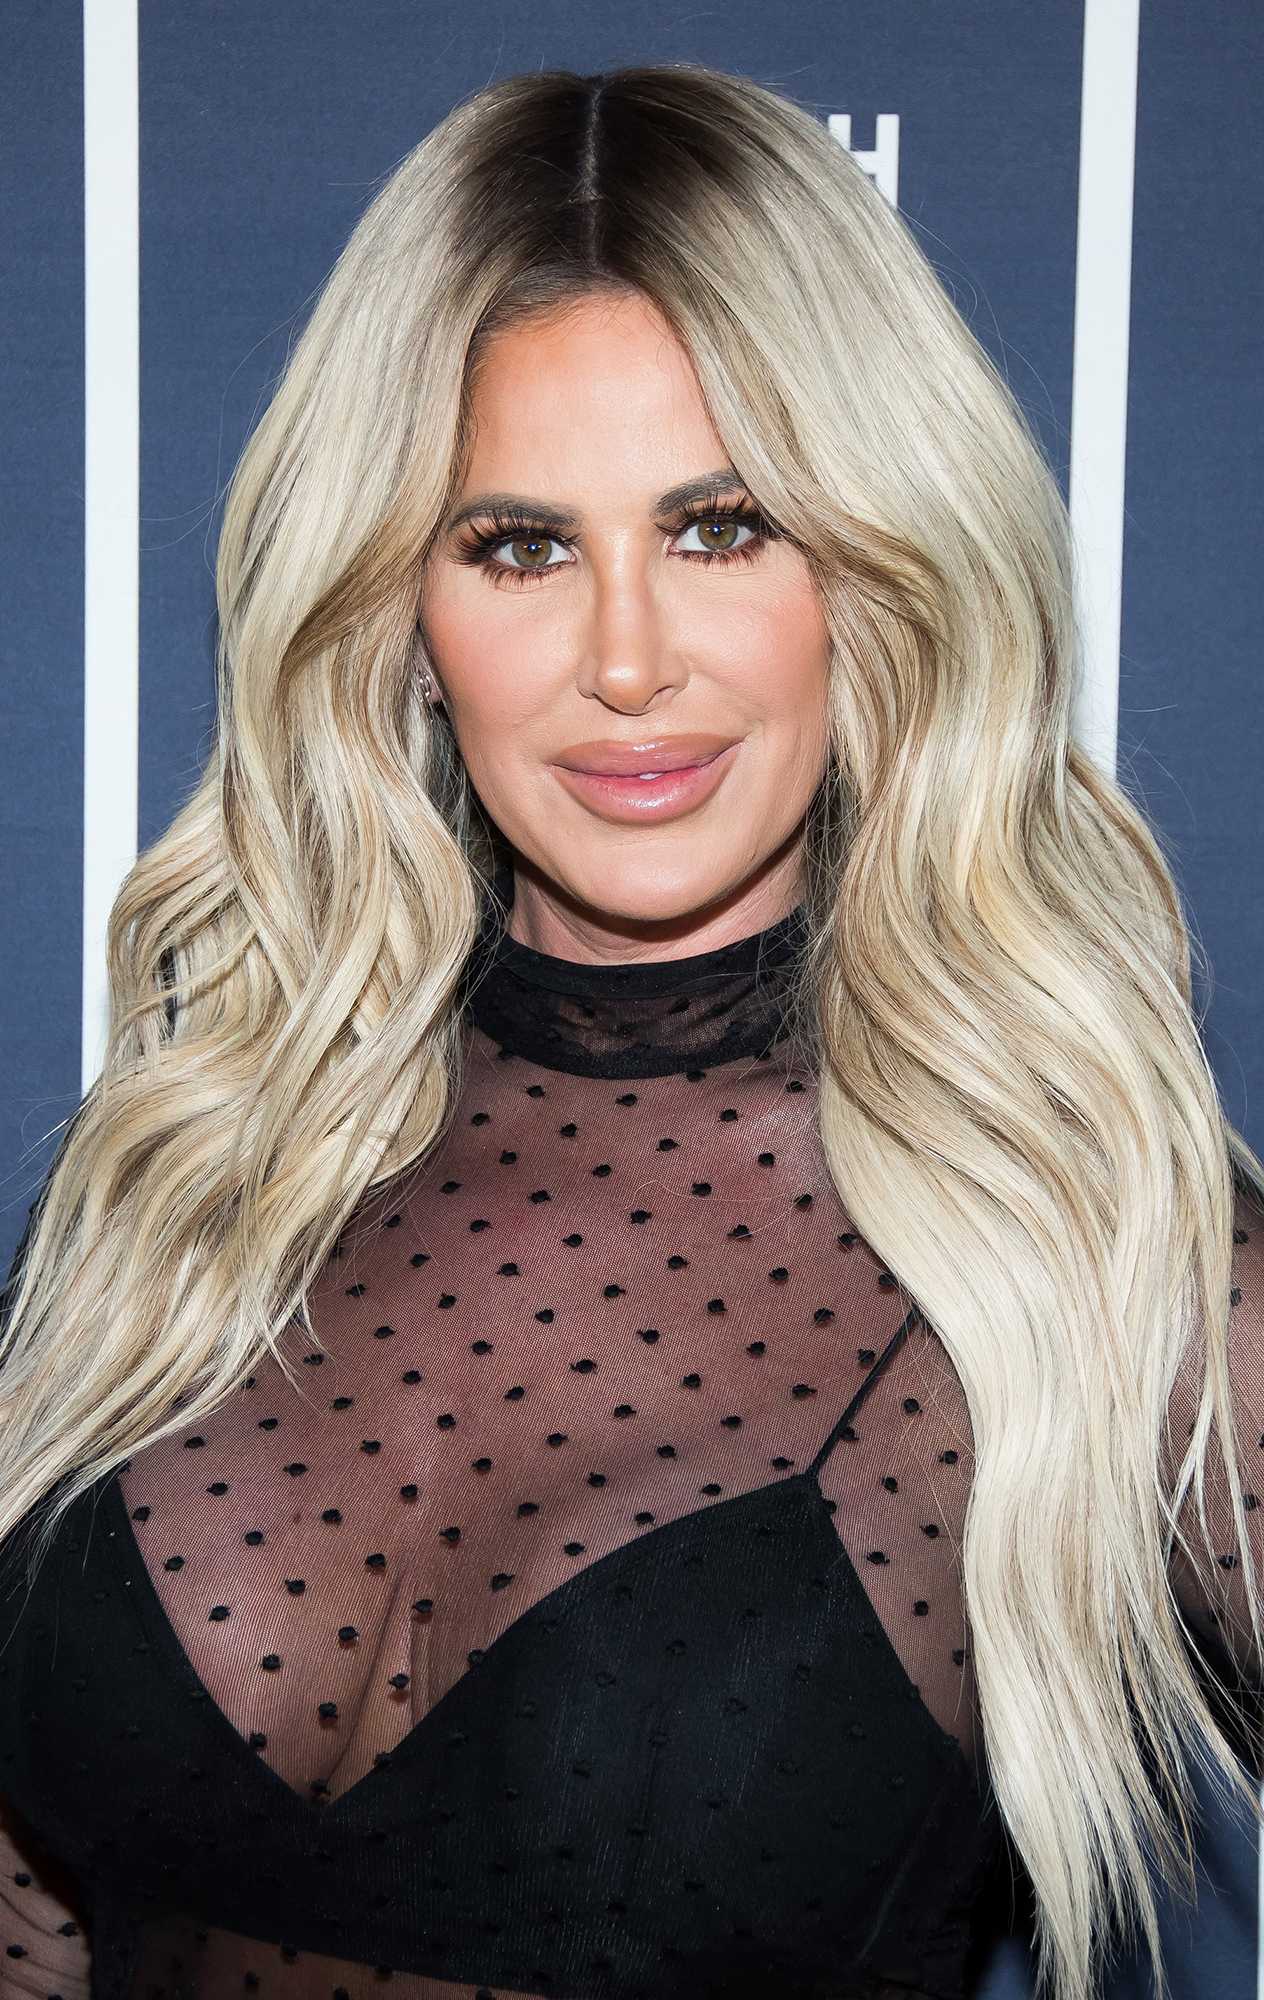 55 Hot Pictures Of Kim Zolciak-Biermann Which Will Make You Think Dirty Thoughts | Best Of Comic Books